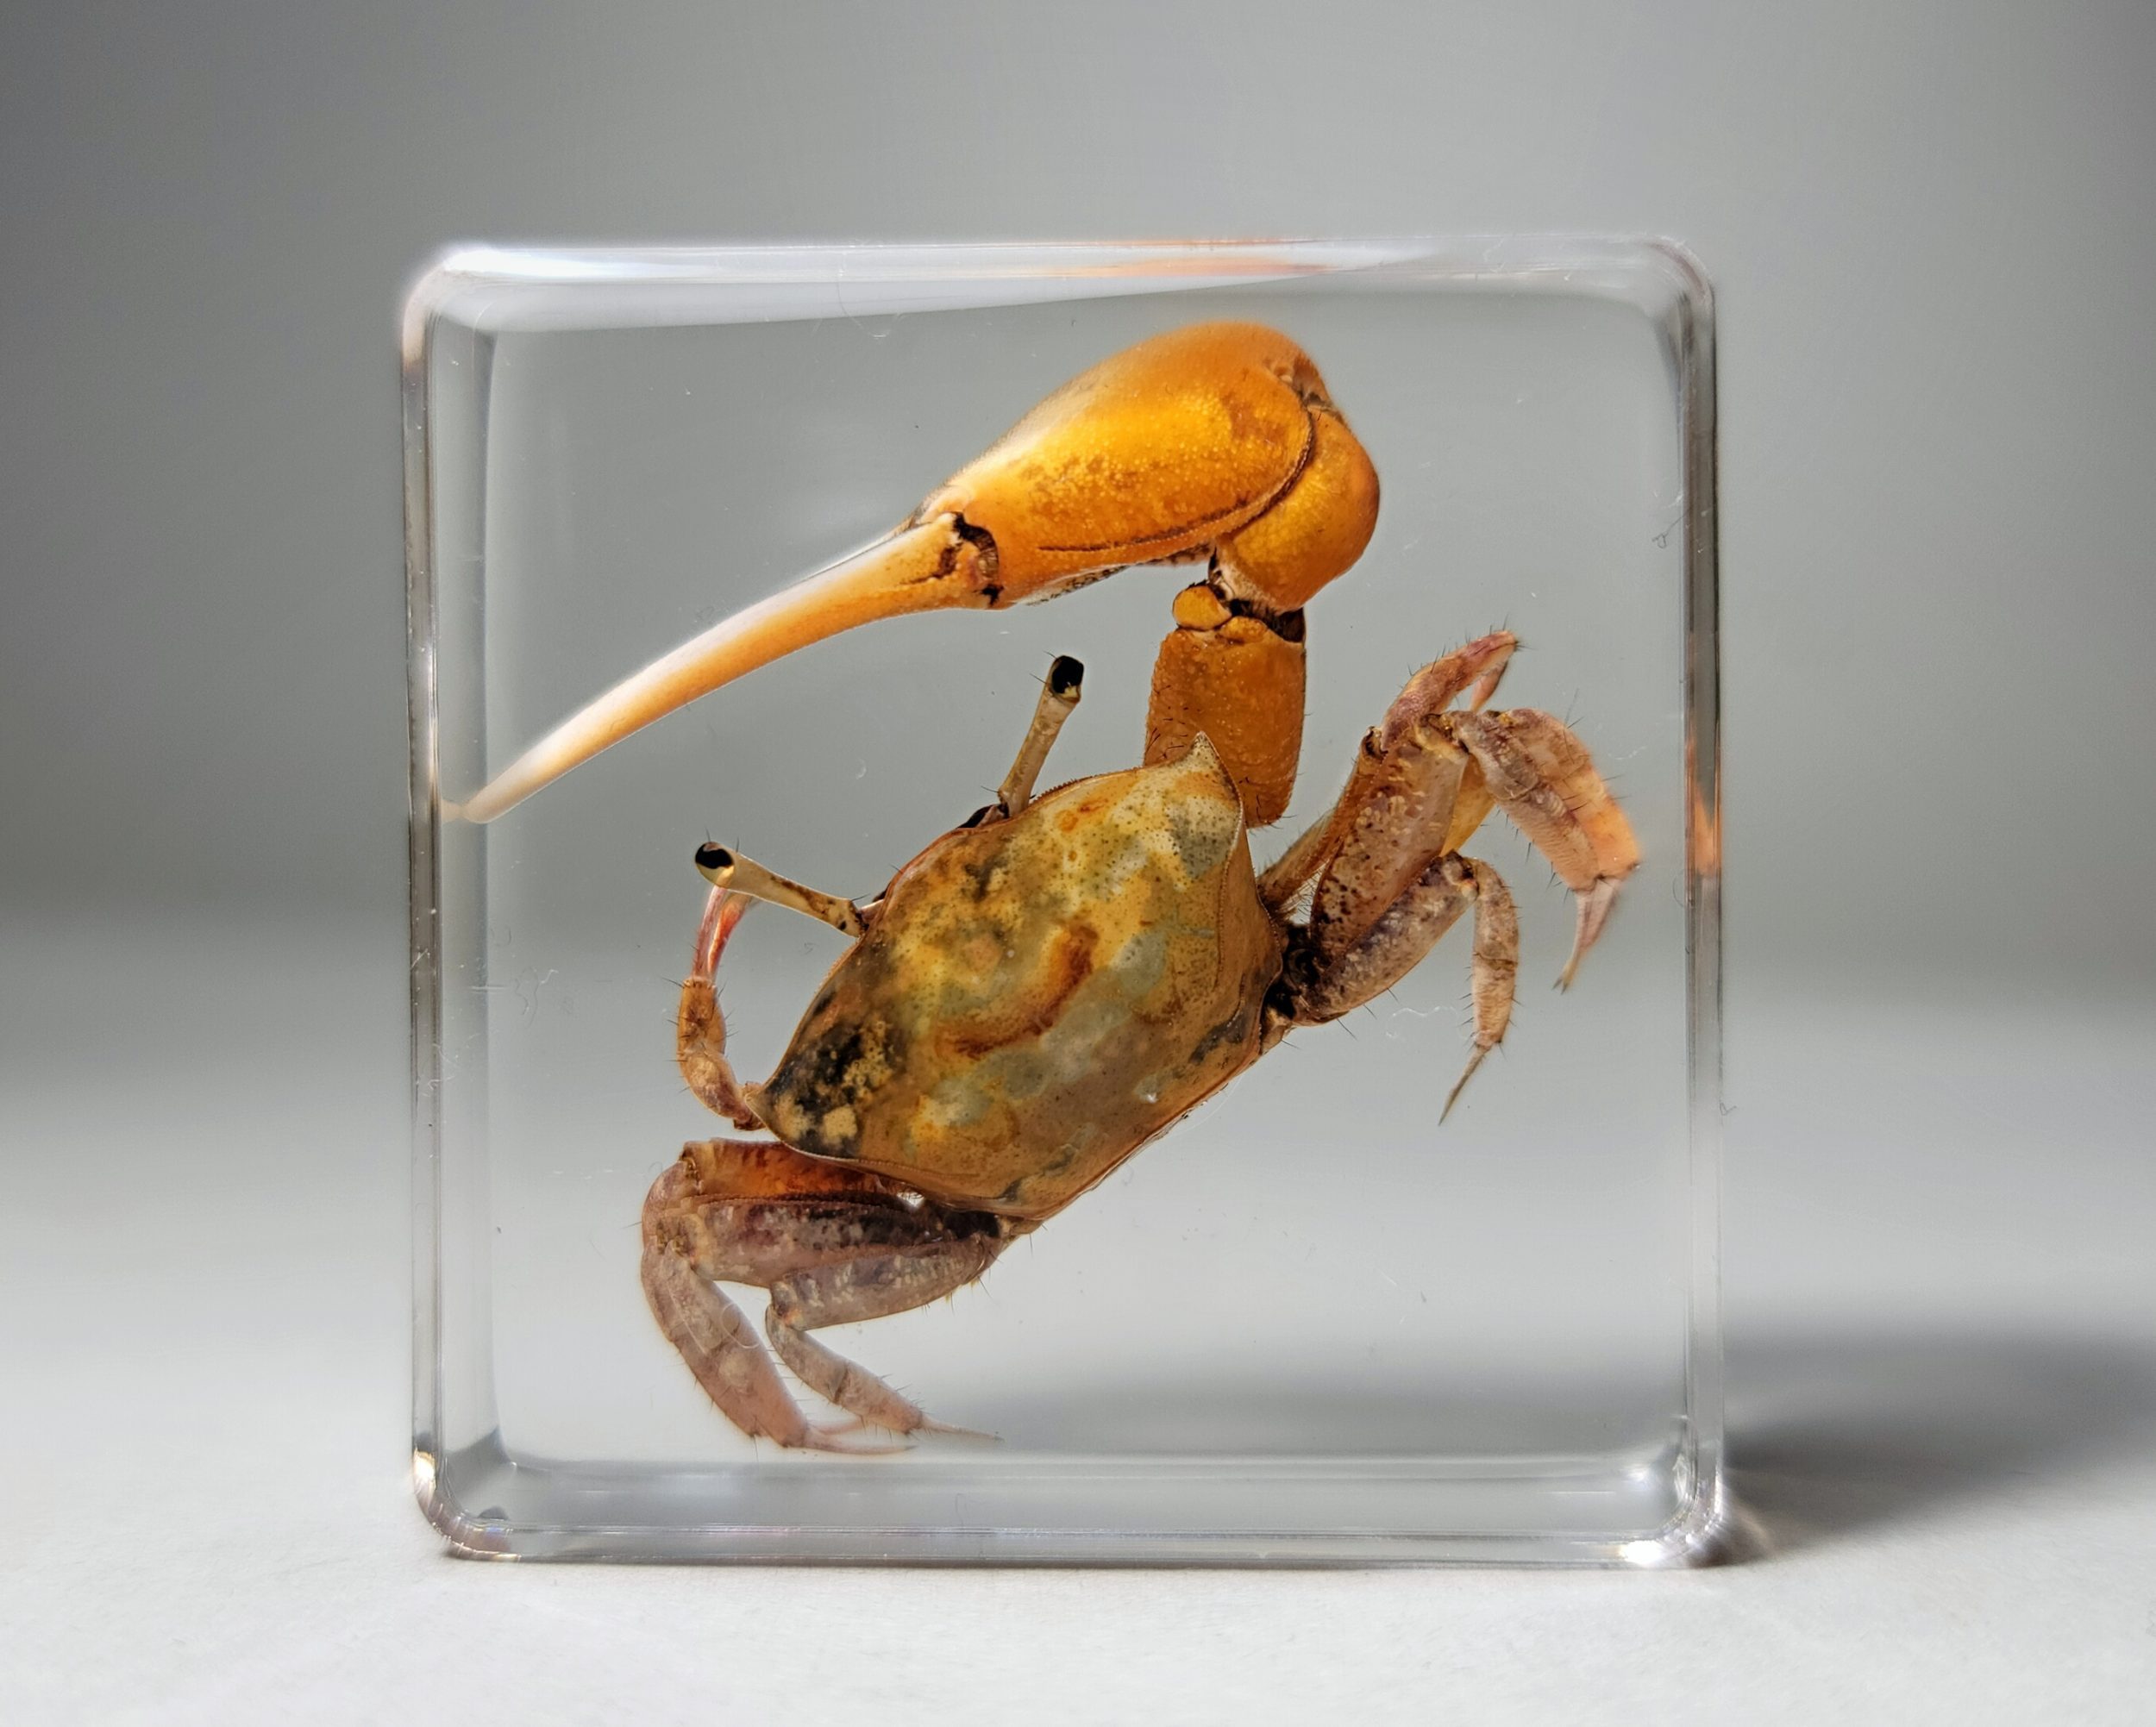 Fiddler Crab in Resin, Uca crassipes - Insects In Resin